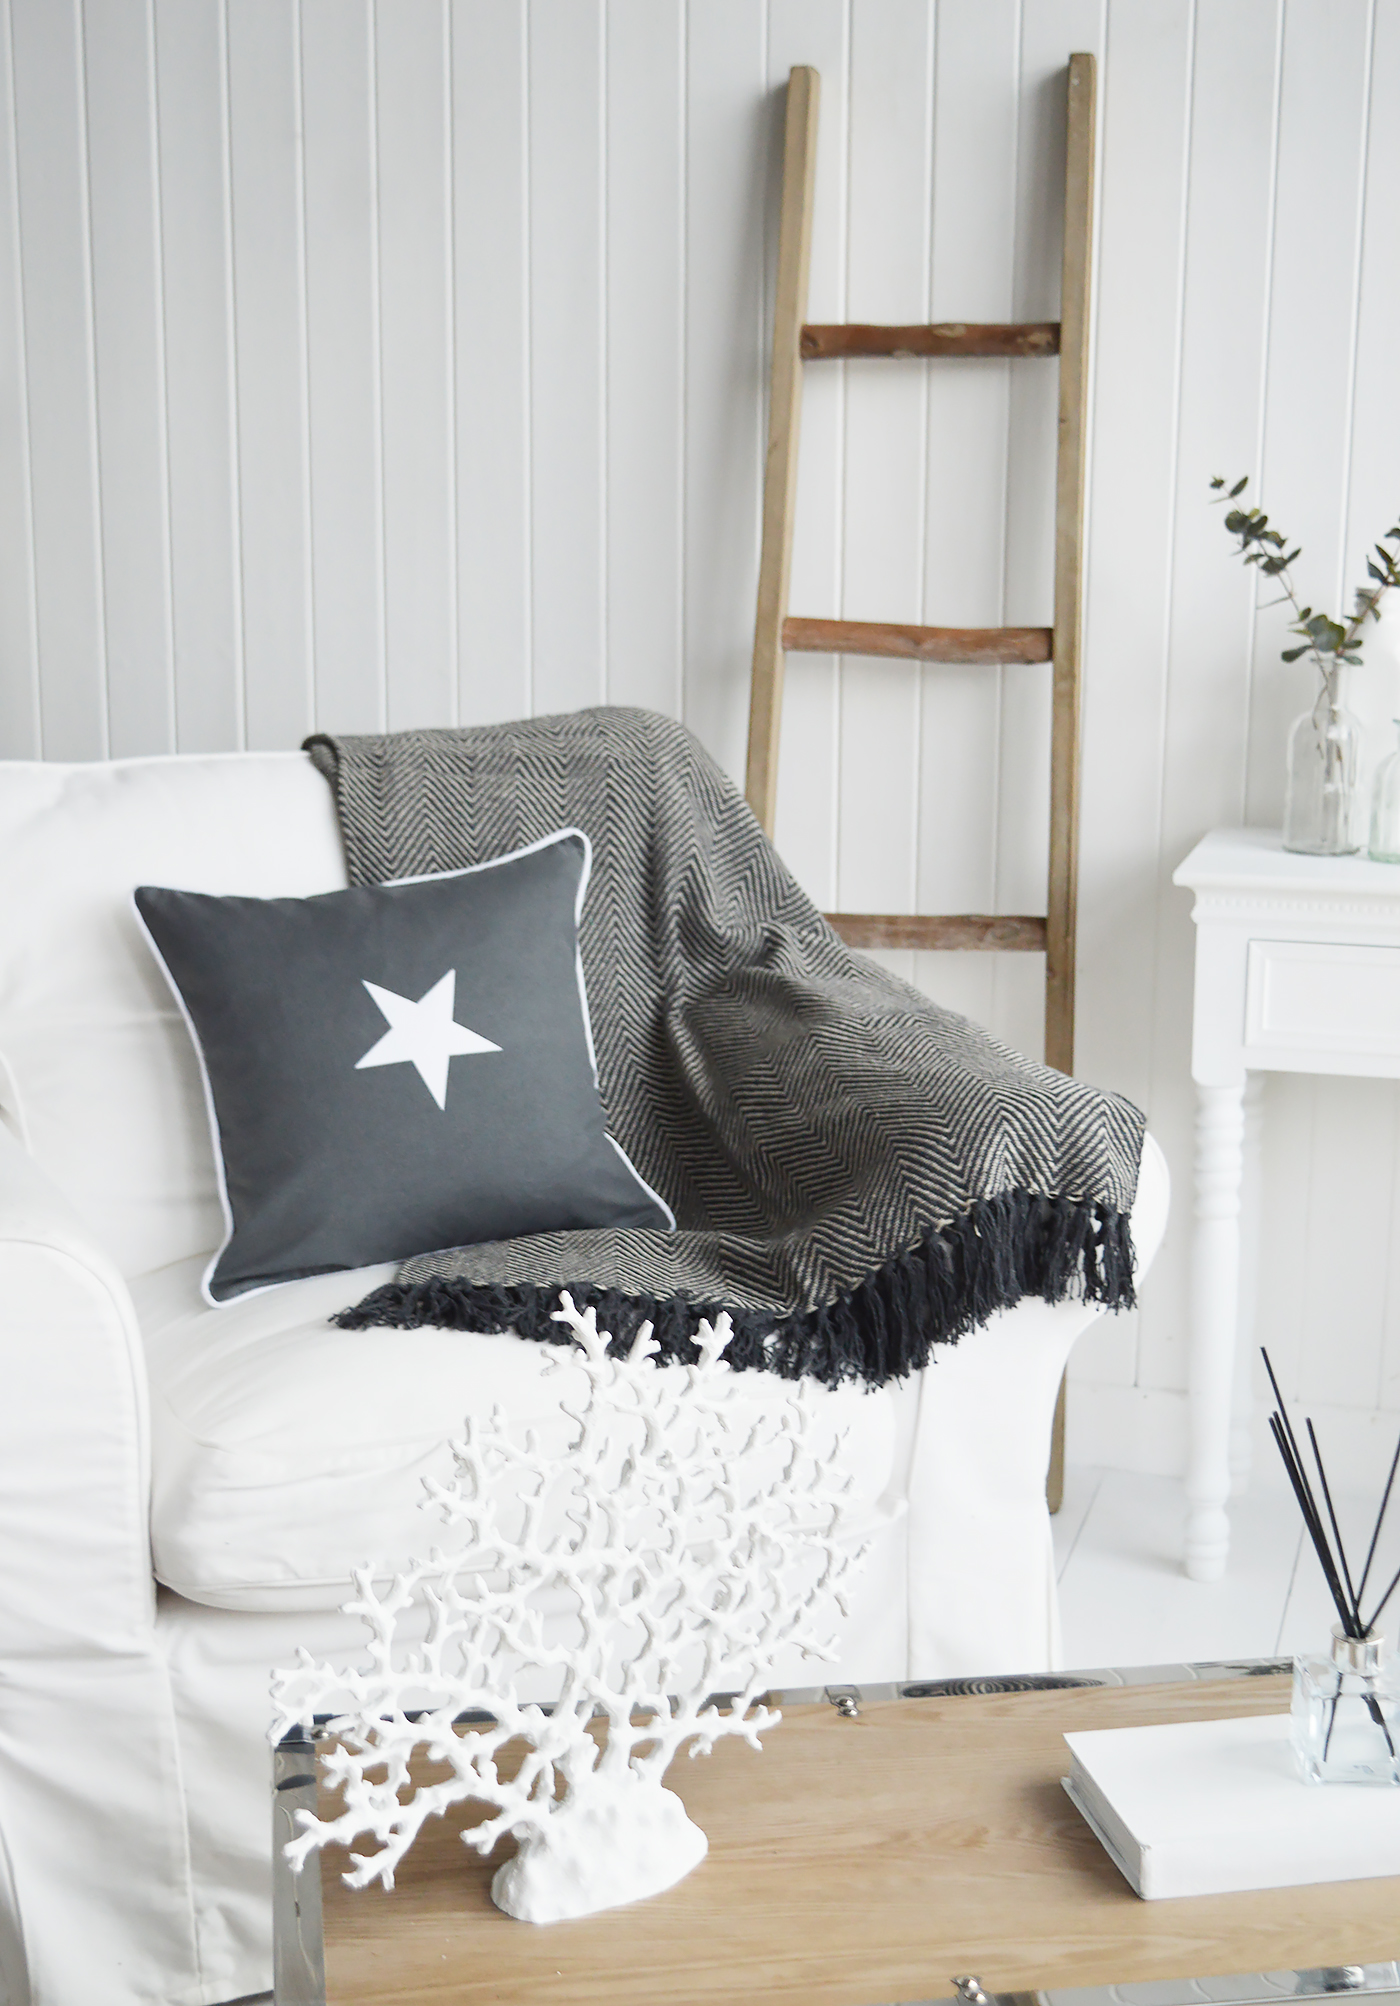 New England style cushions for home interiors - Grey Star Cushion